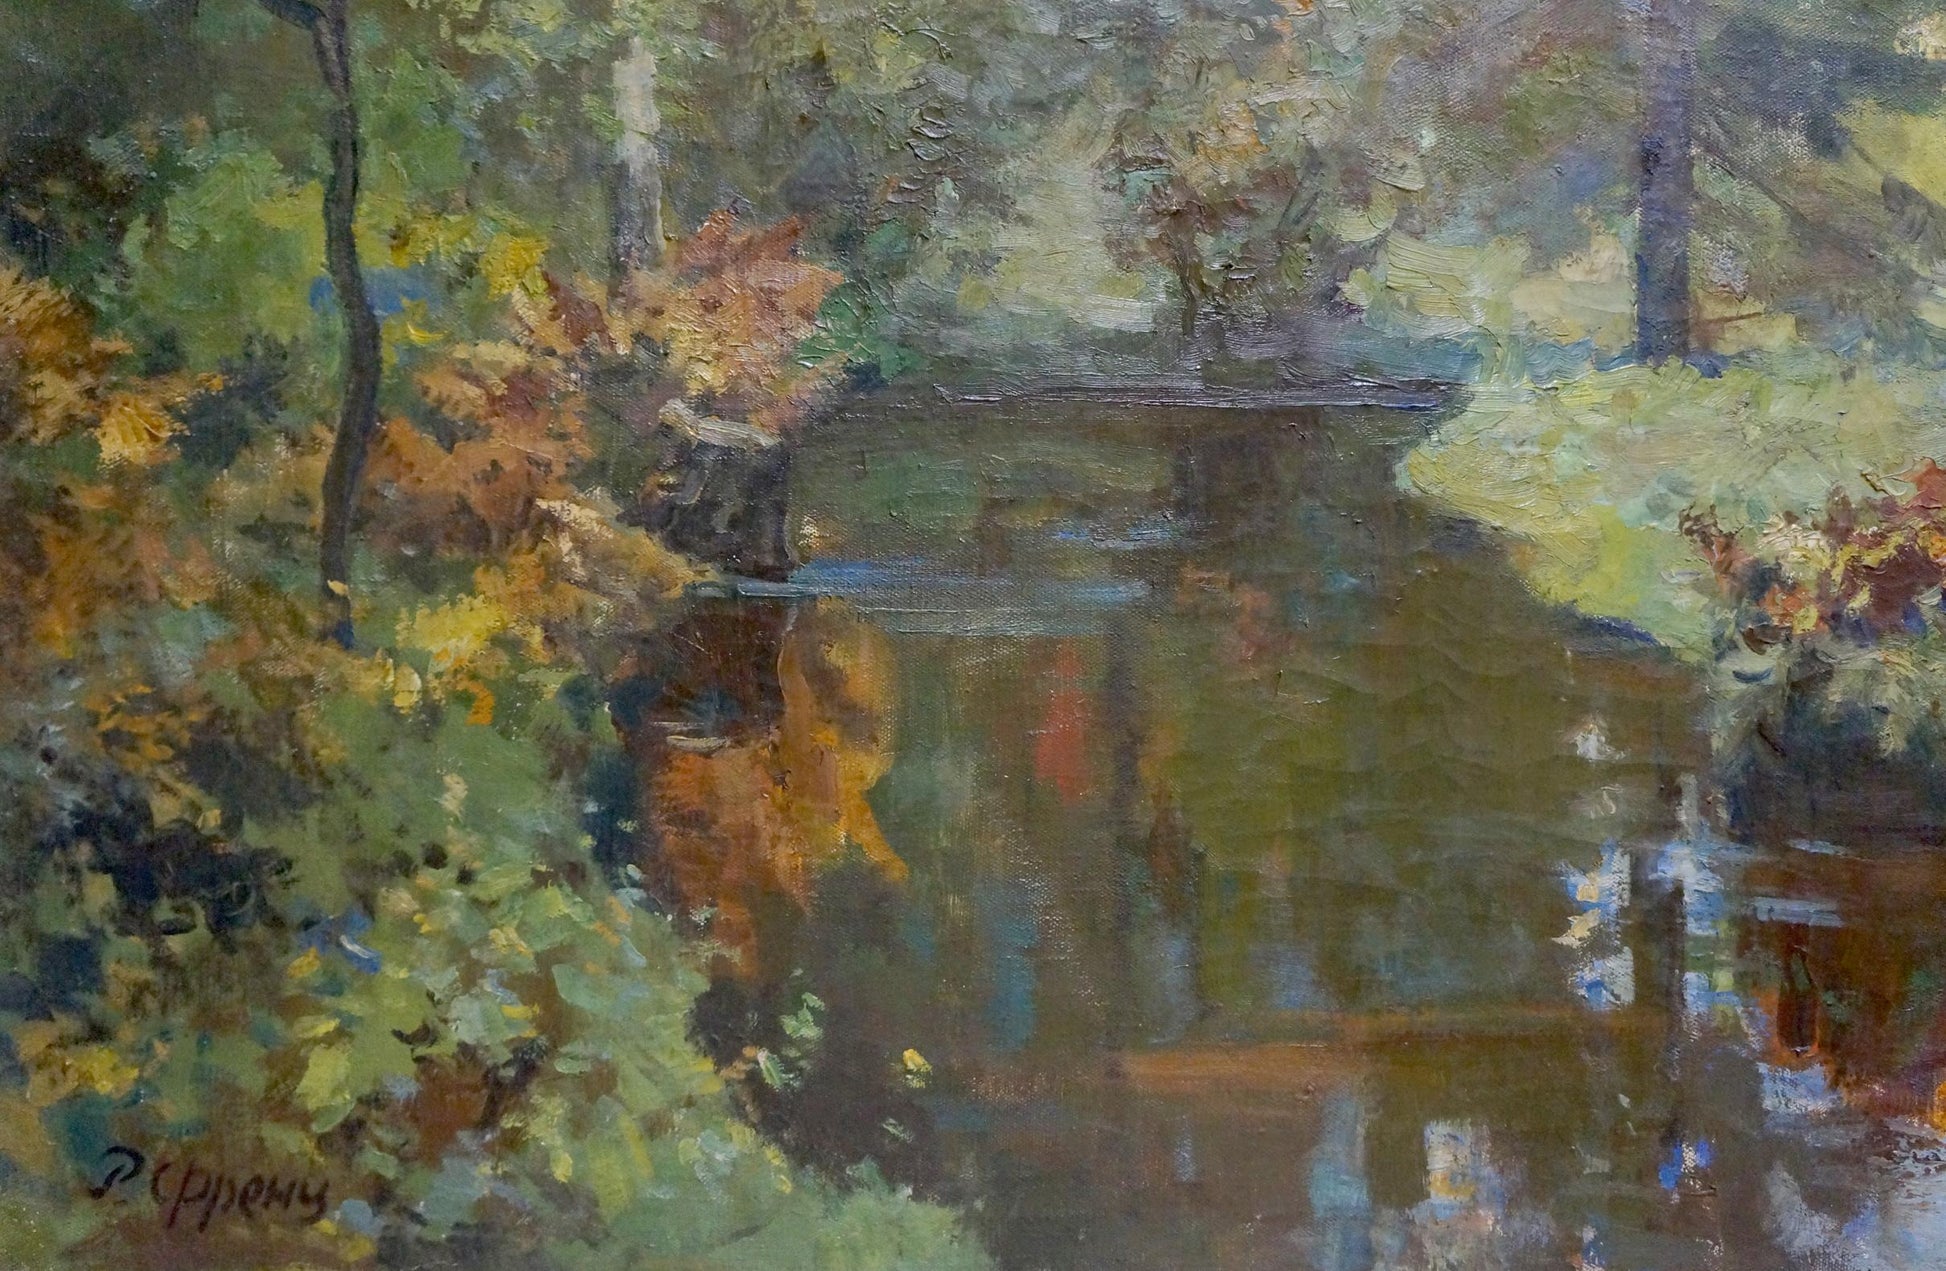 Rudolph Rudolfovich Frents' oil painting captures a forest stream